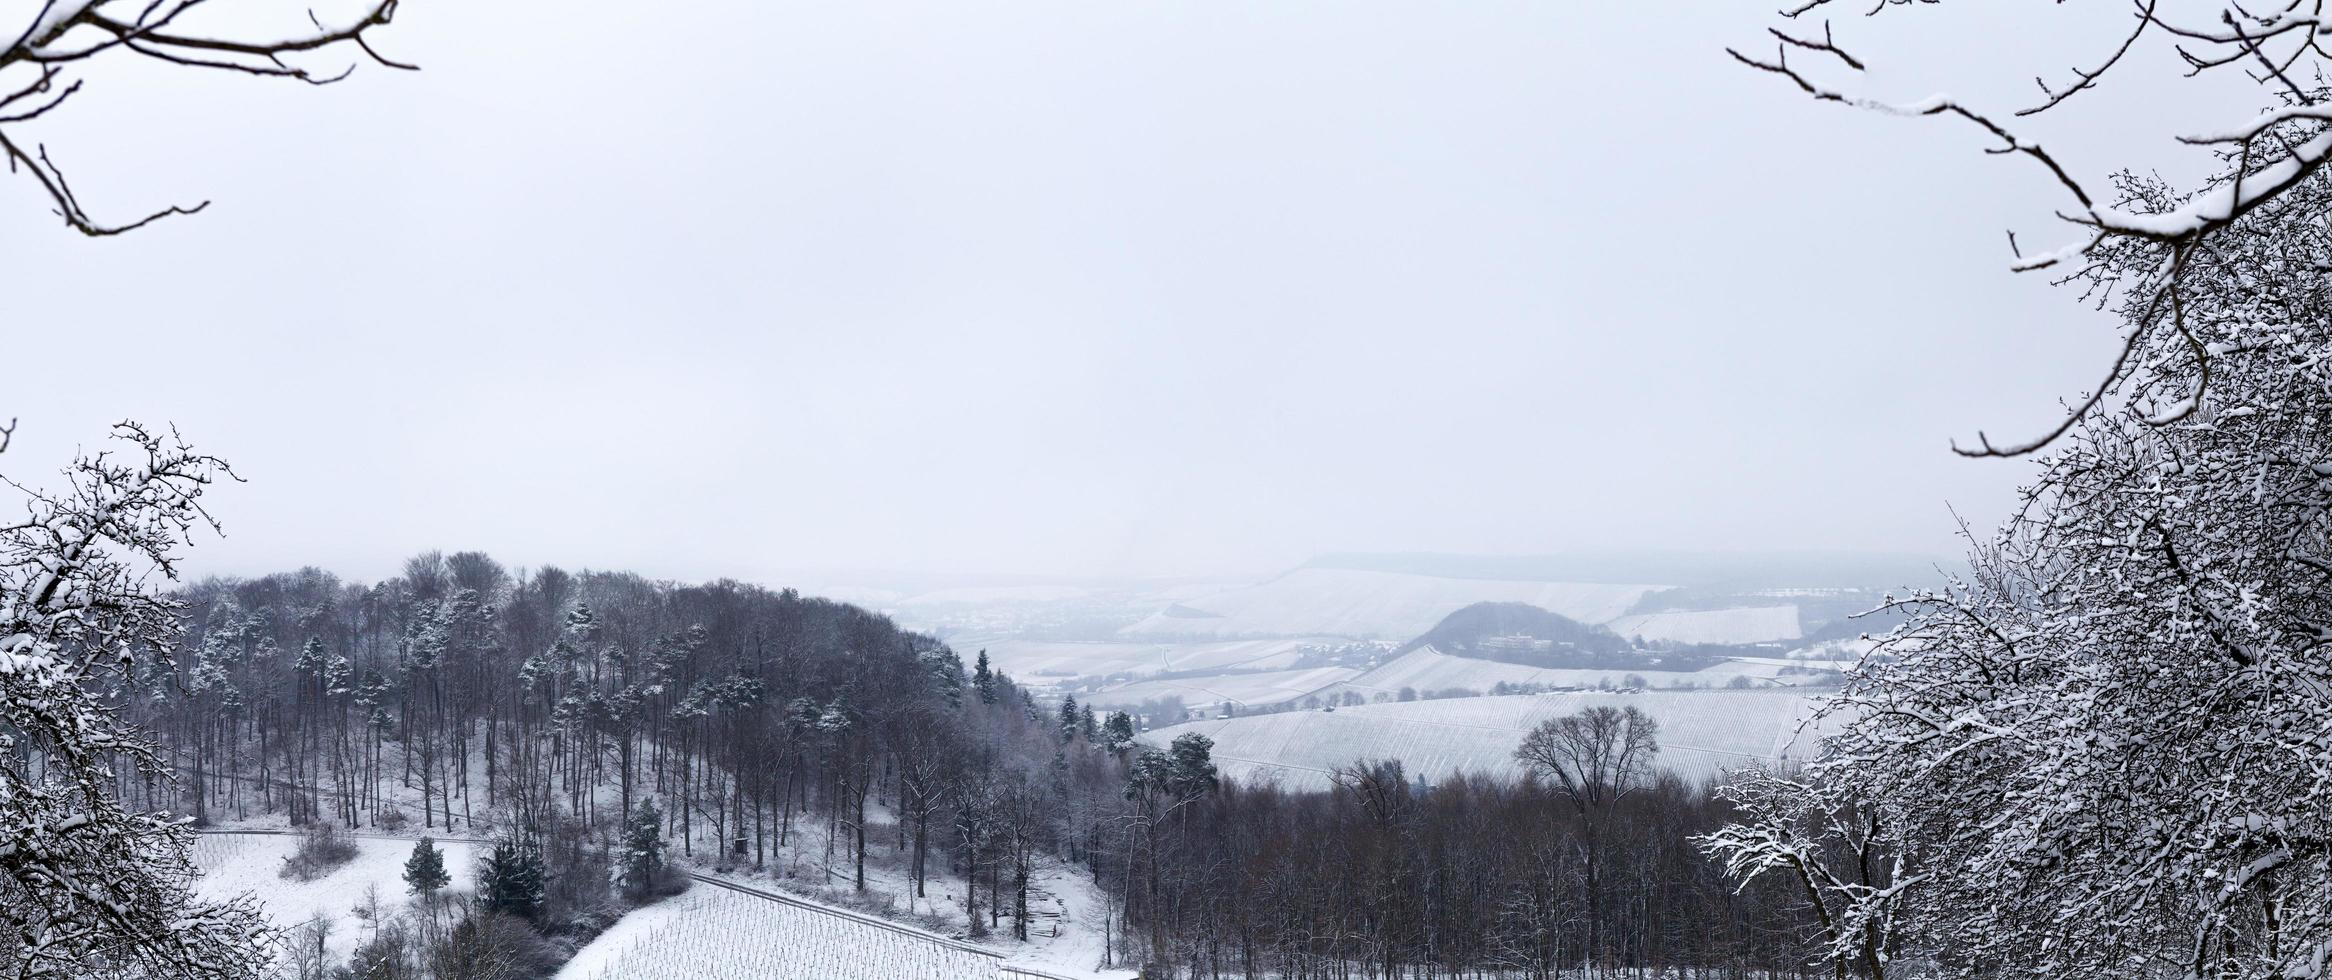 View of a winter landscape photo